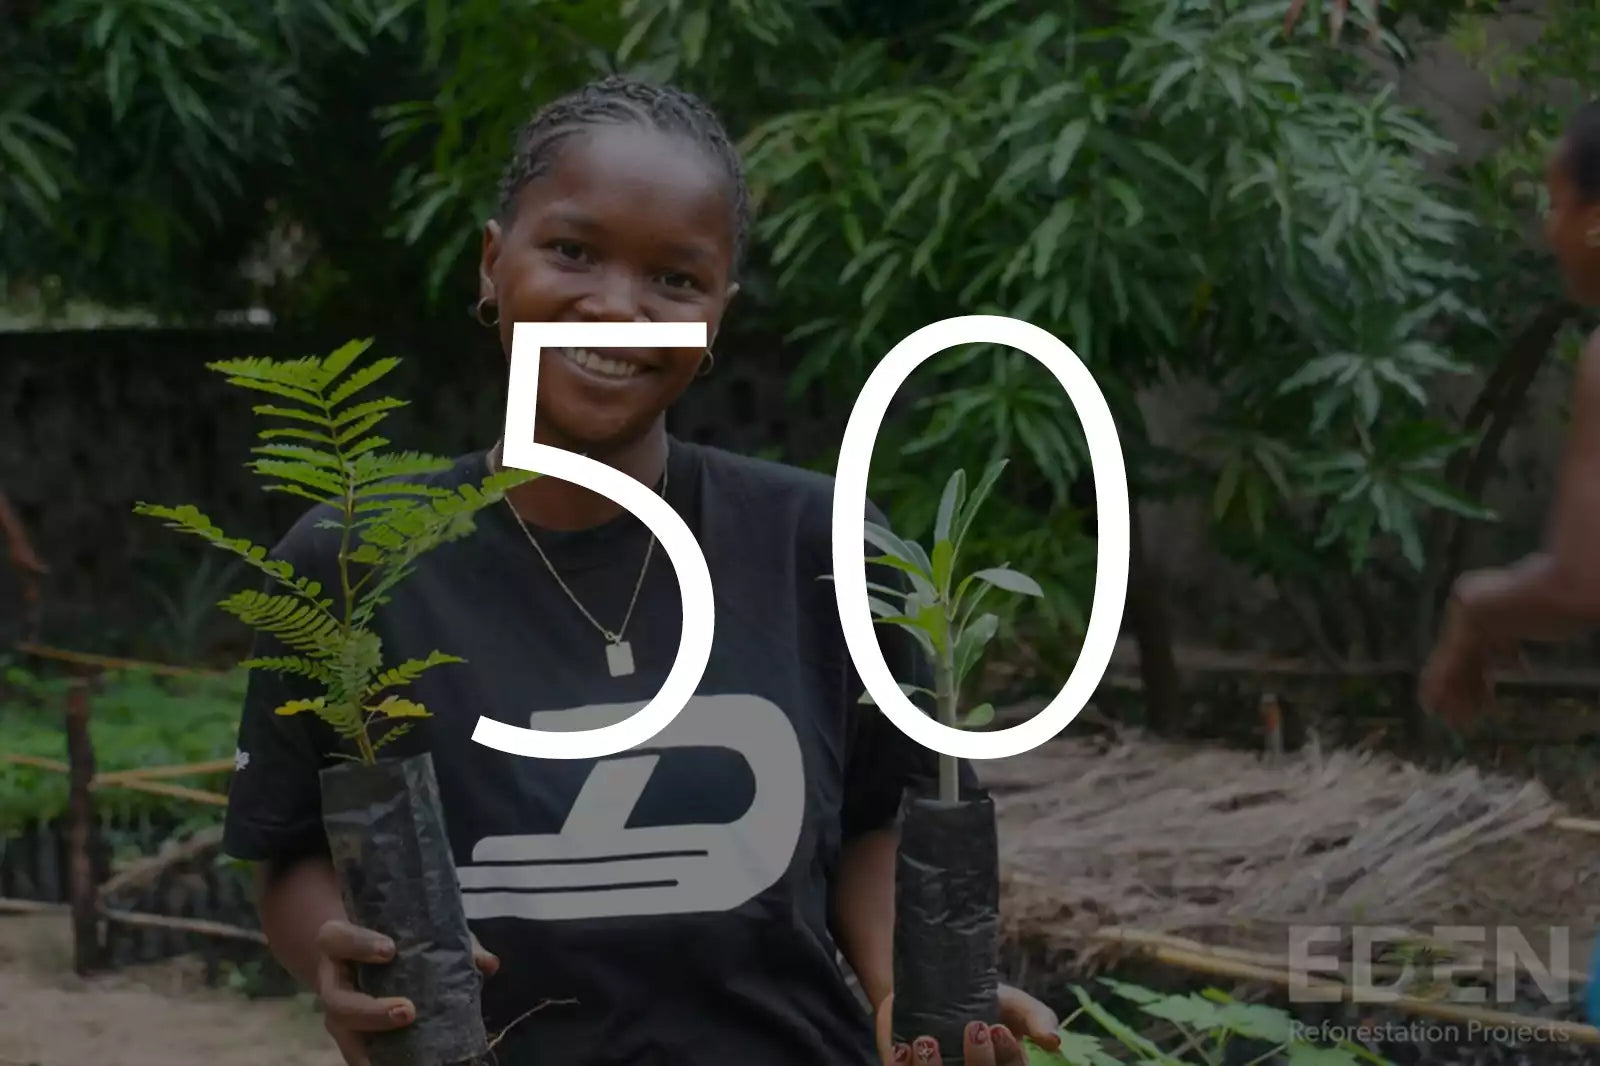 Plant 50 Trees With Eden Reforestation Projects